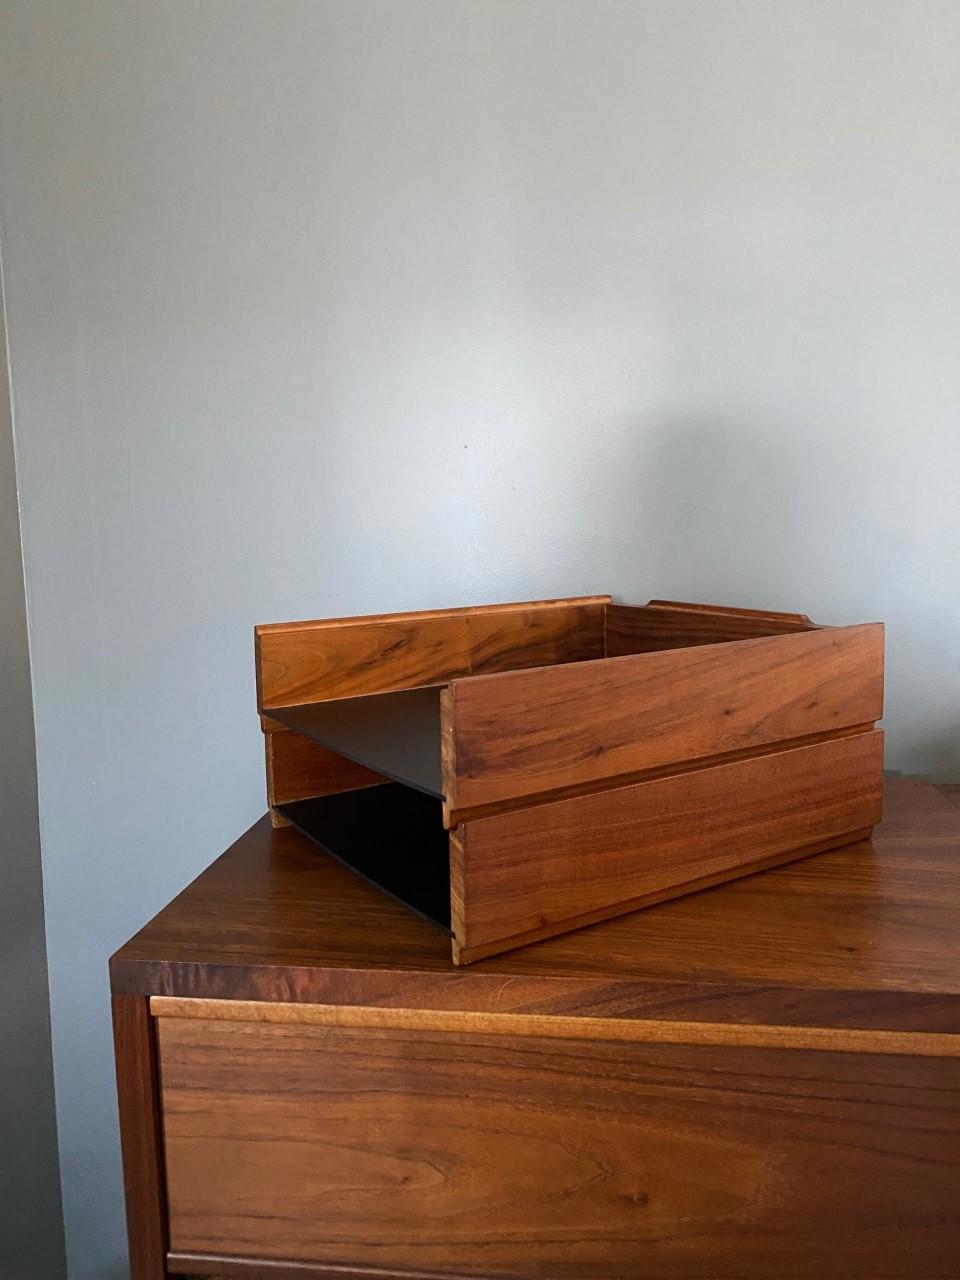 Handsome and chic double letter desk tray with solid walnut walls, circa 1970s. Beautiful accent to any executives desk or complement to your décor. Classic California design. This piece by R.W. Shield Industries projects style and legacy in the